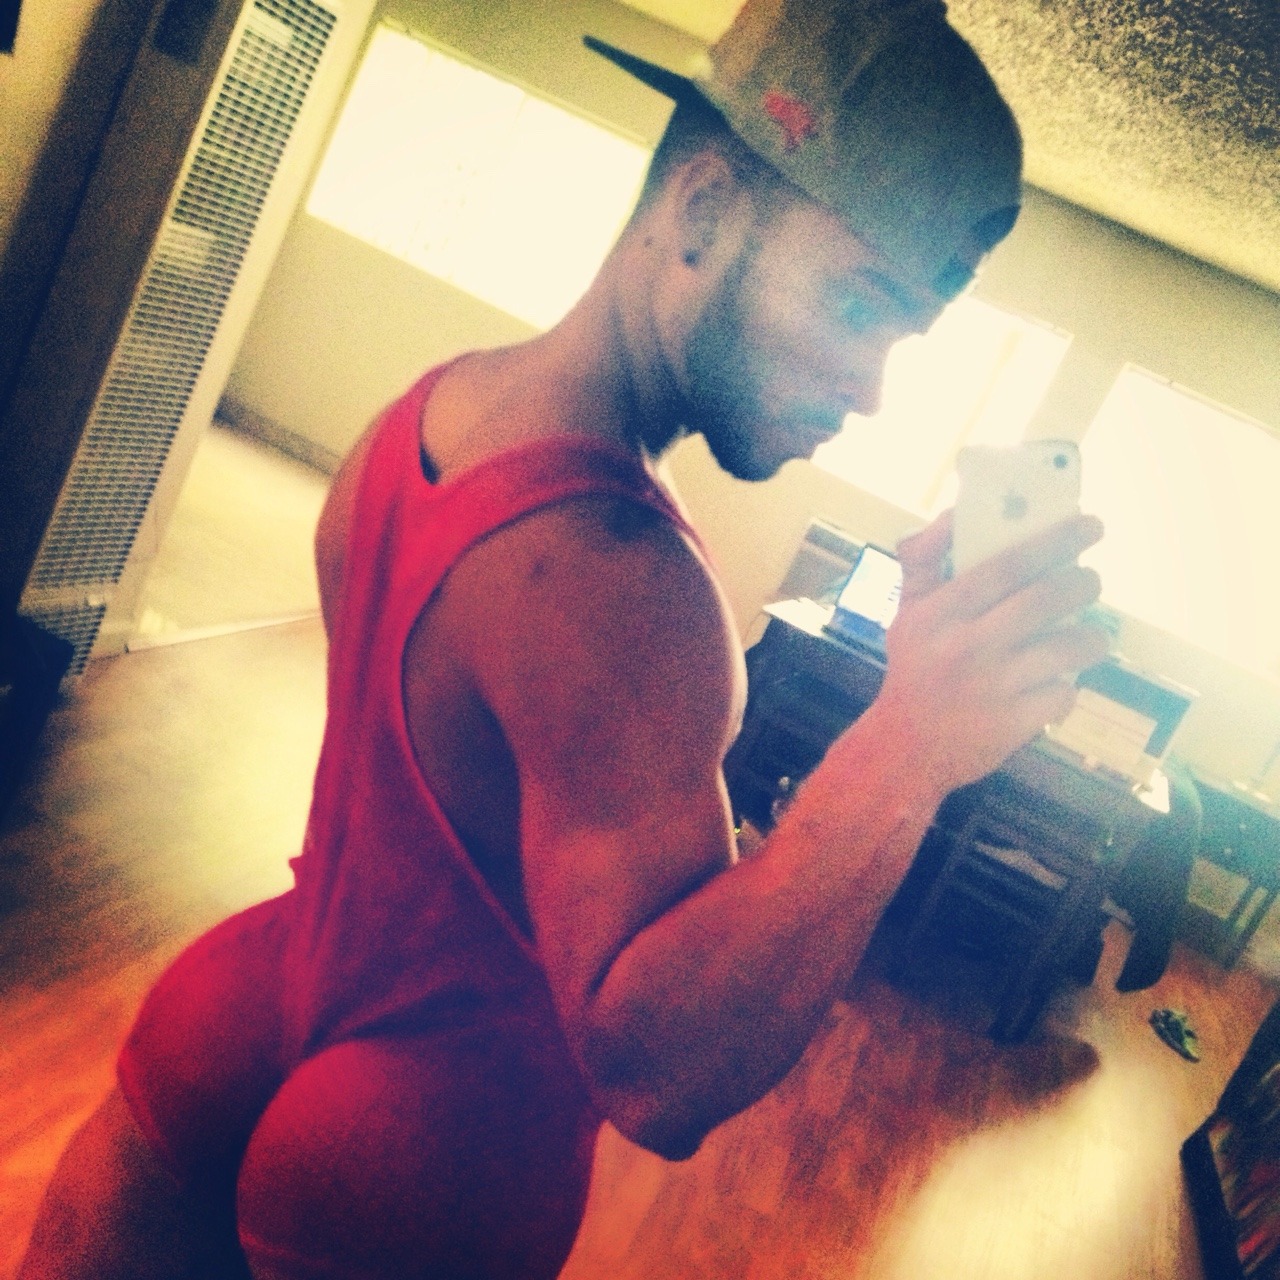 dominicanblackboy:  Sexy fat tongue licking juicy Latin ass Juju Mario hot in red!😍😍😍😍😍😰